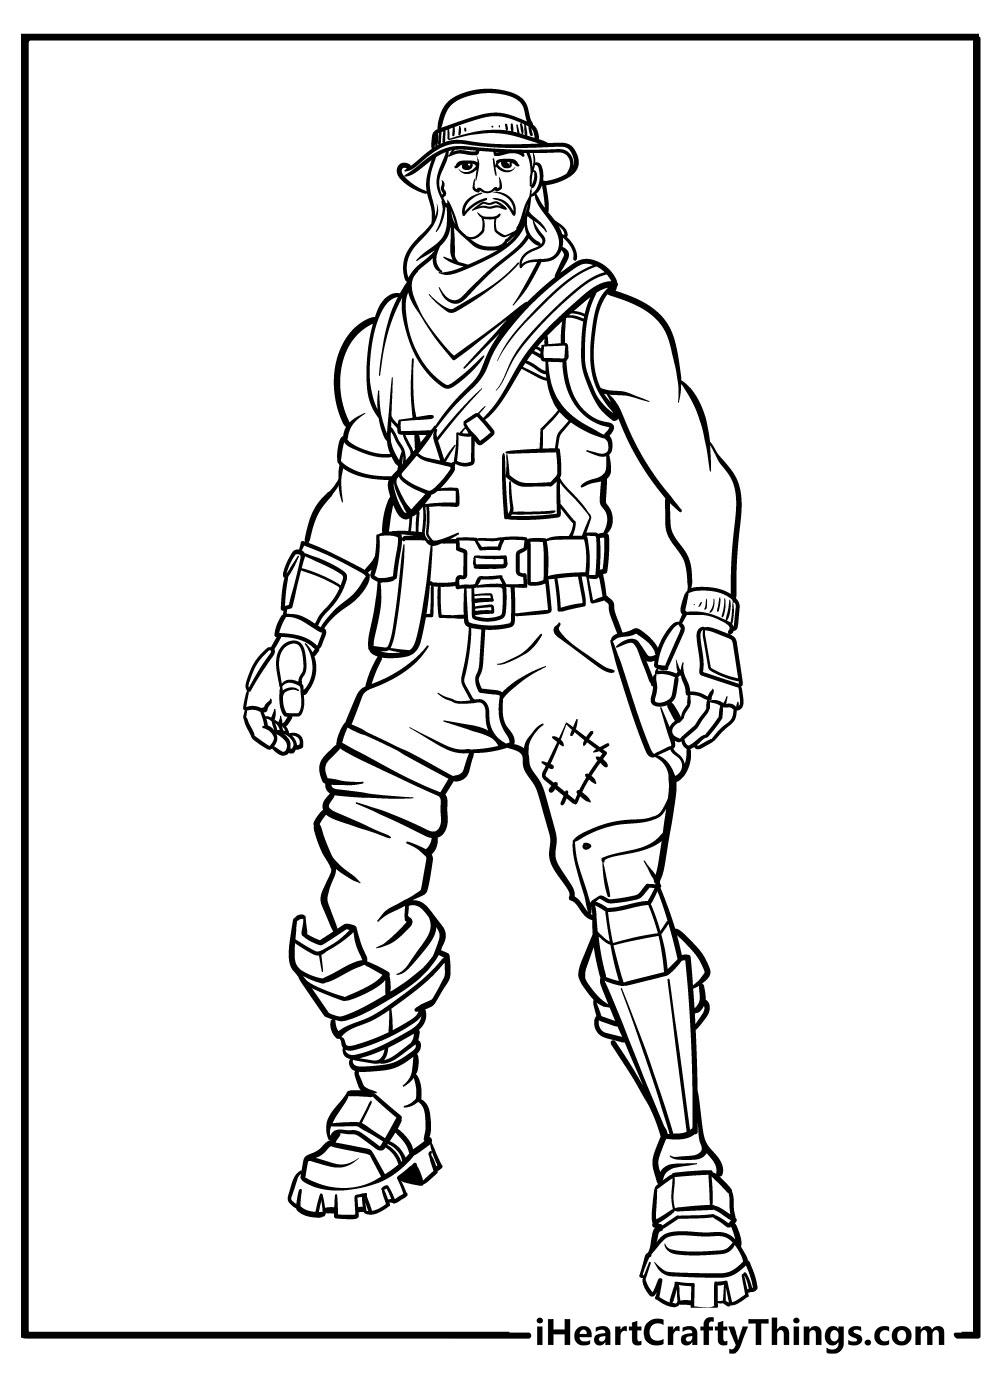 Fortnite Coloring Pages free print out for adults